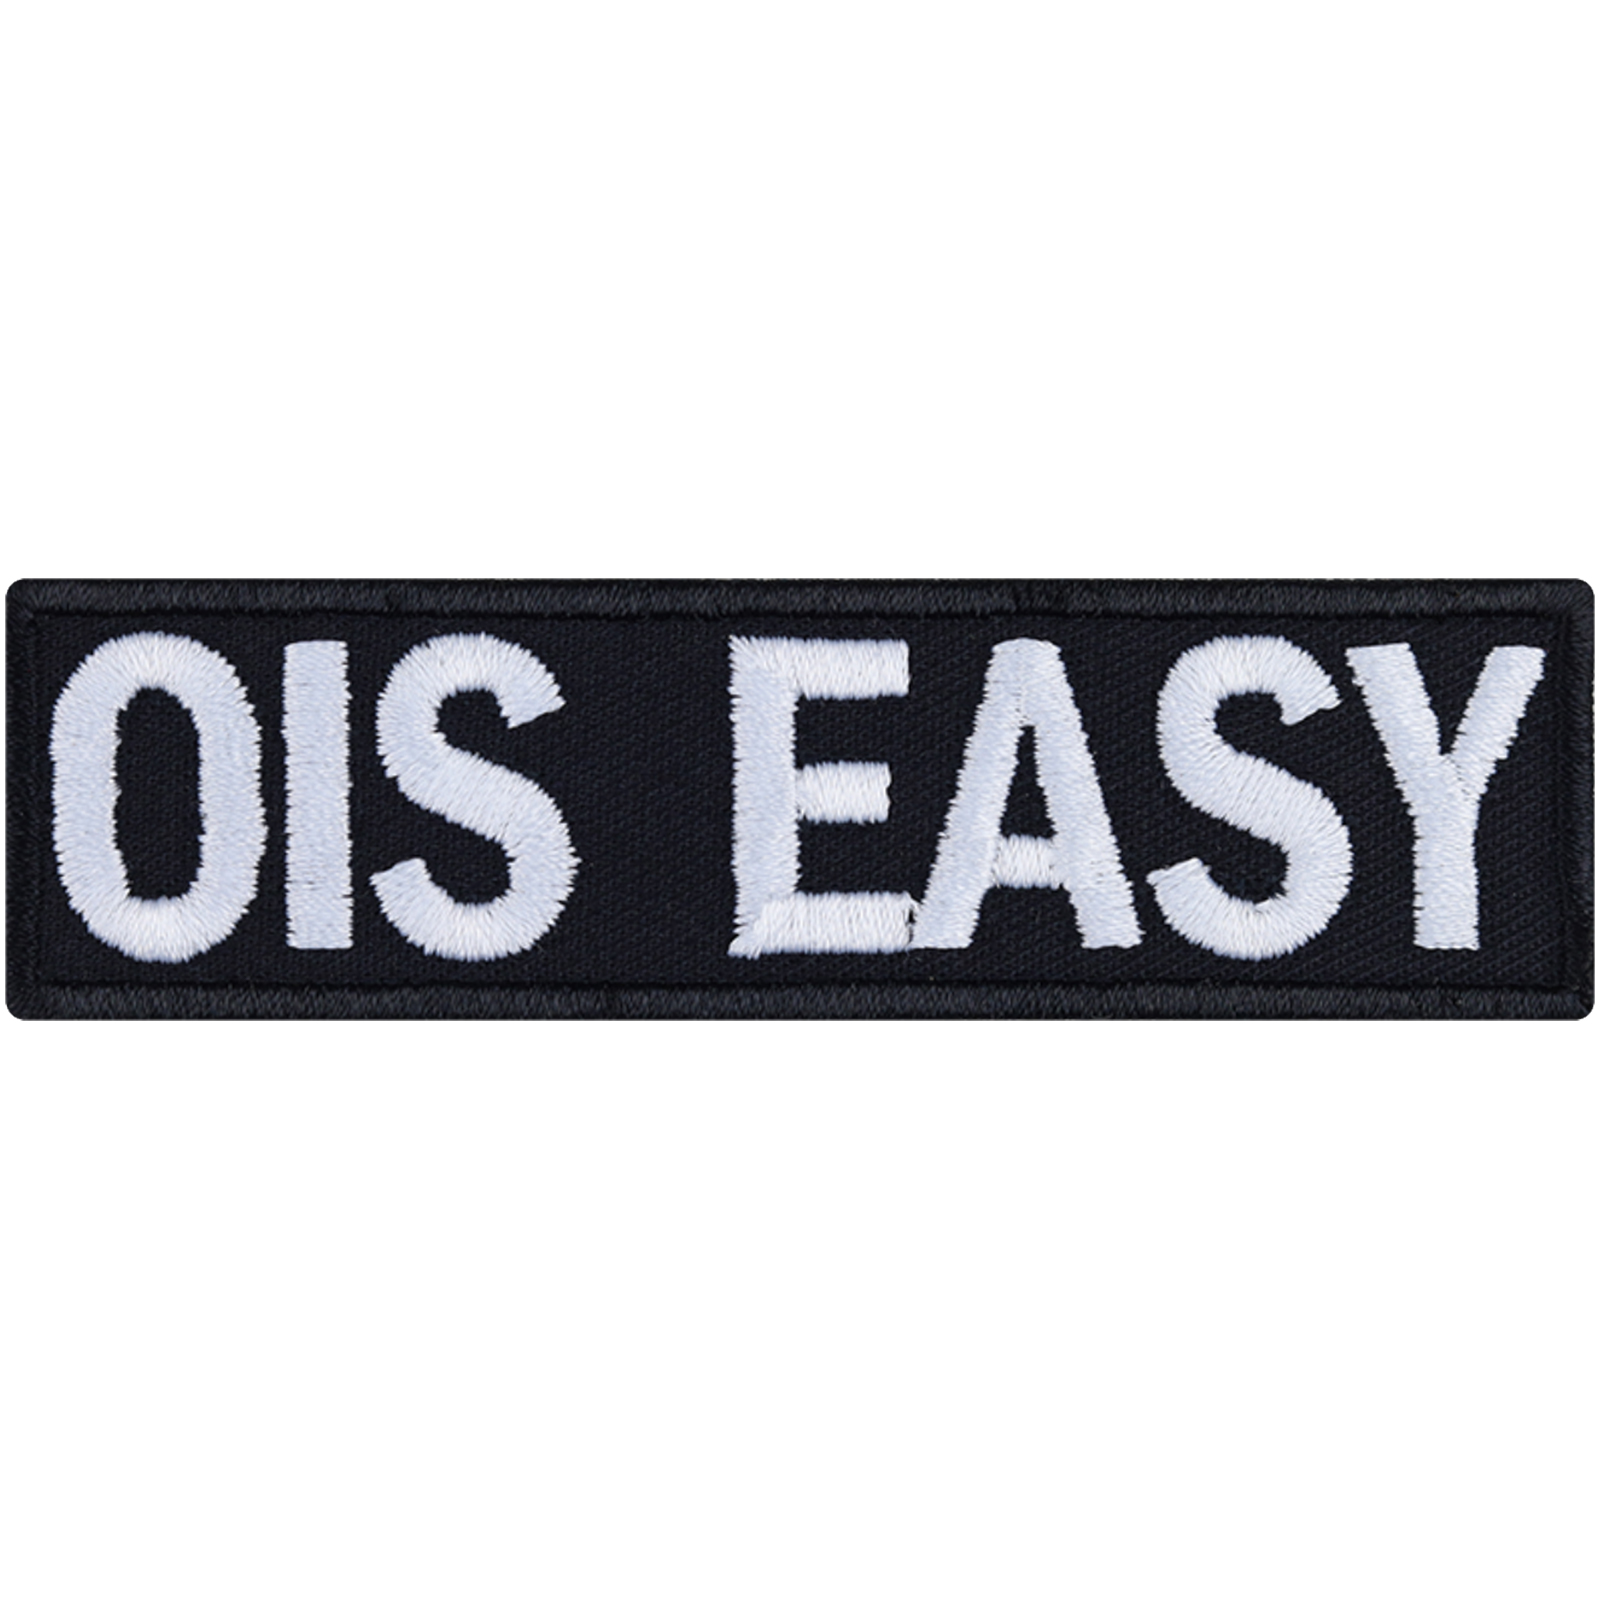 Ois easy - Patch